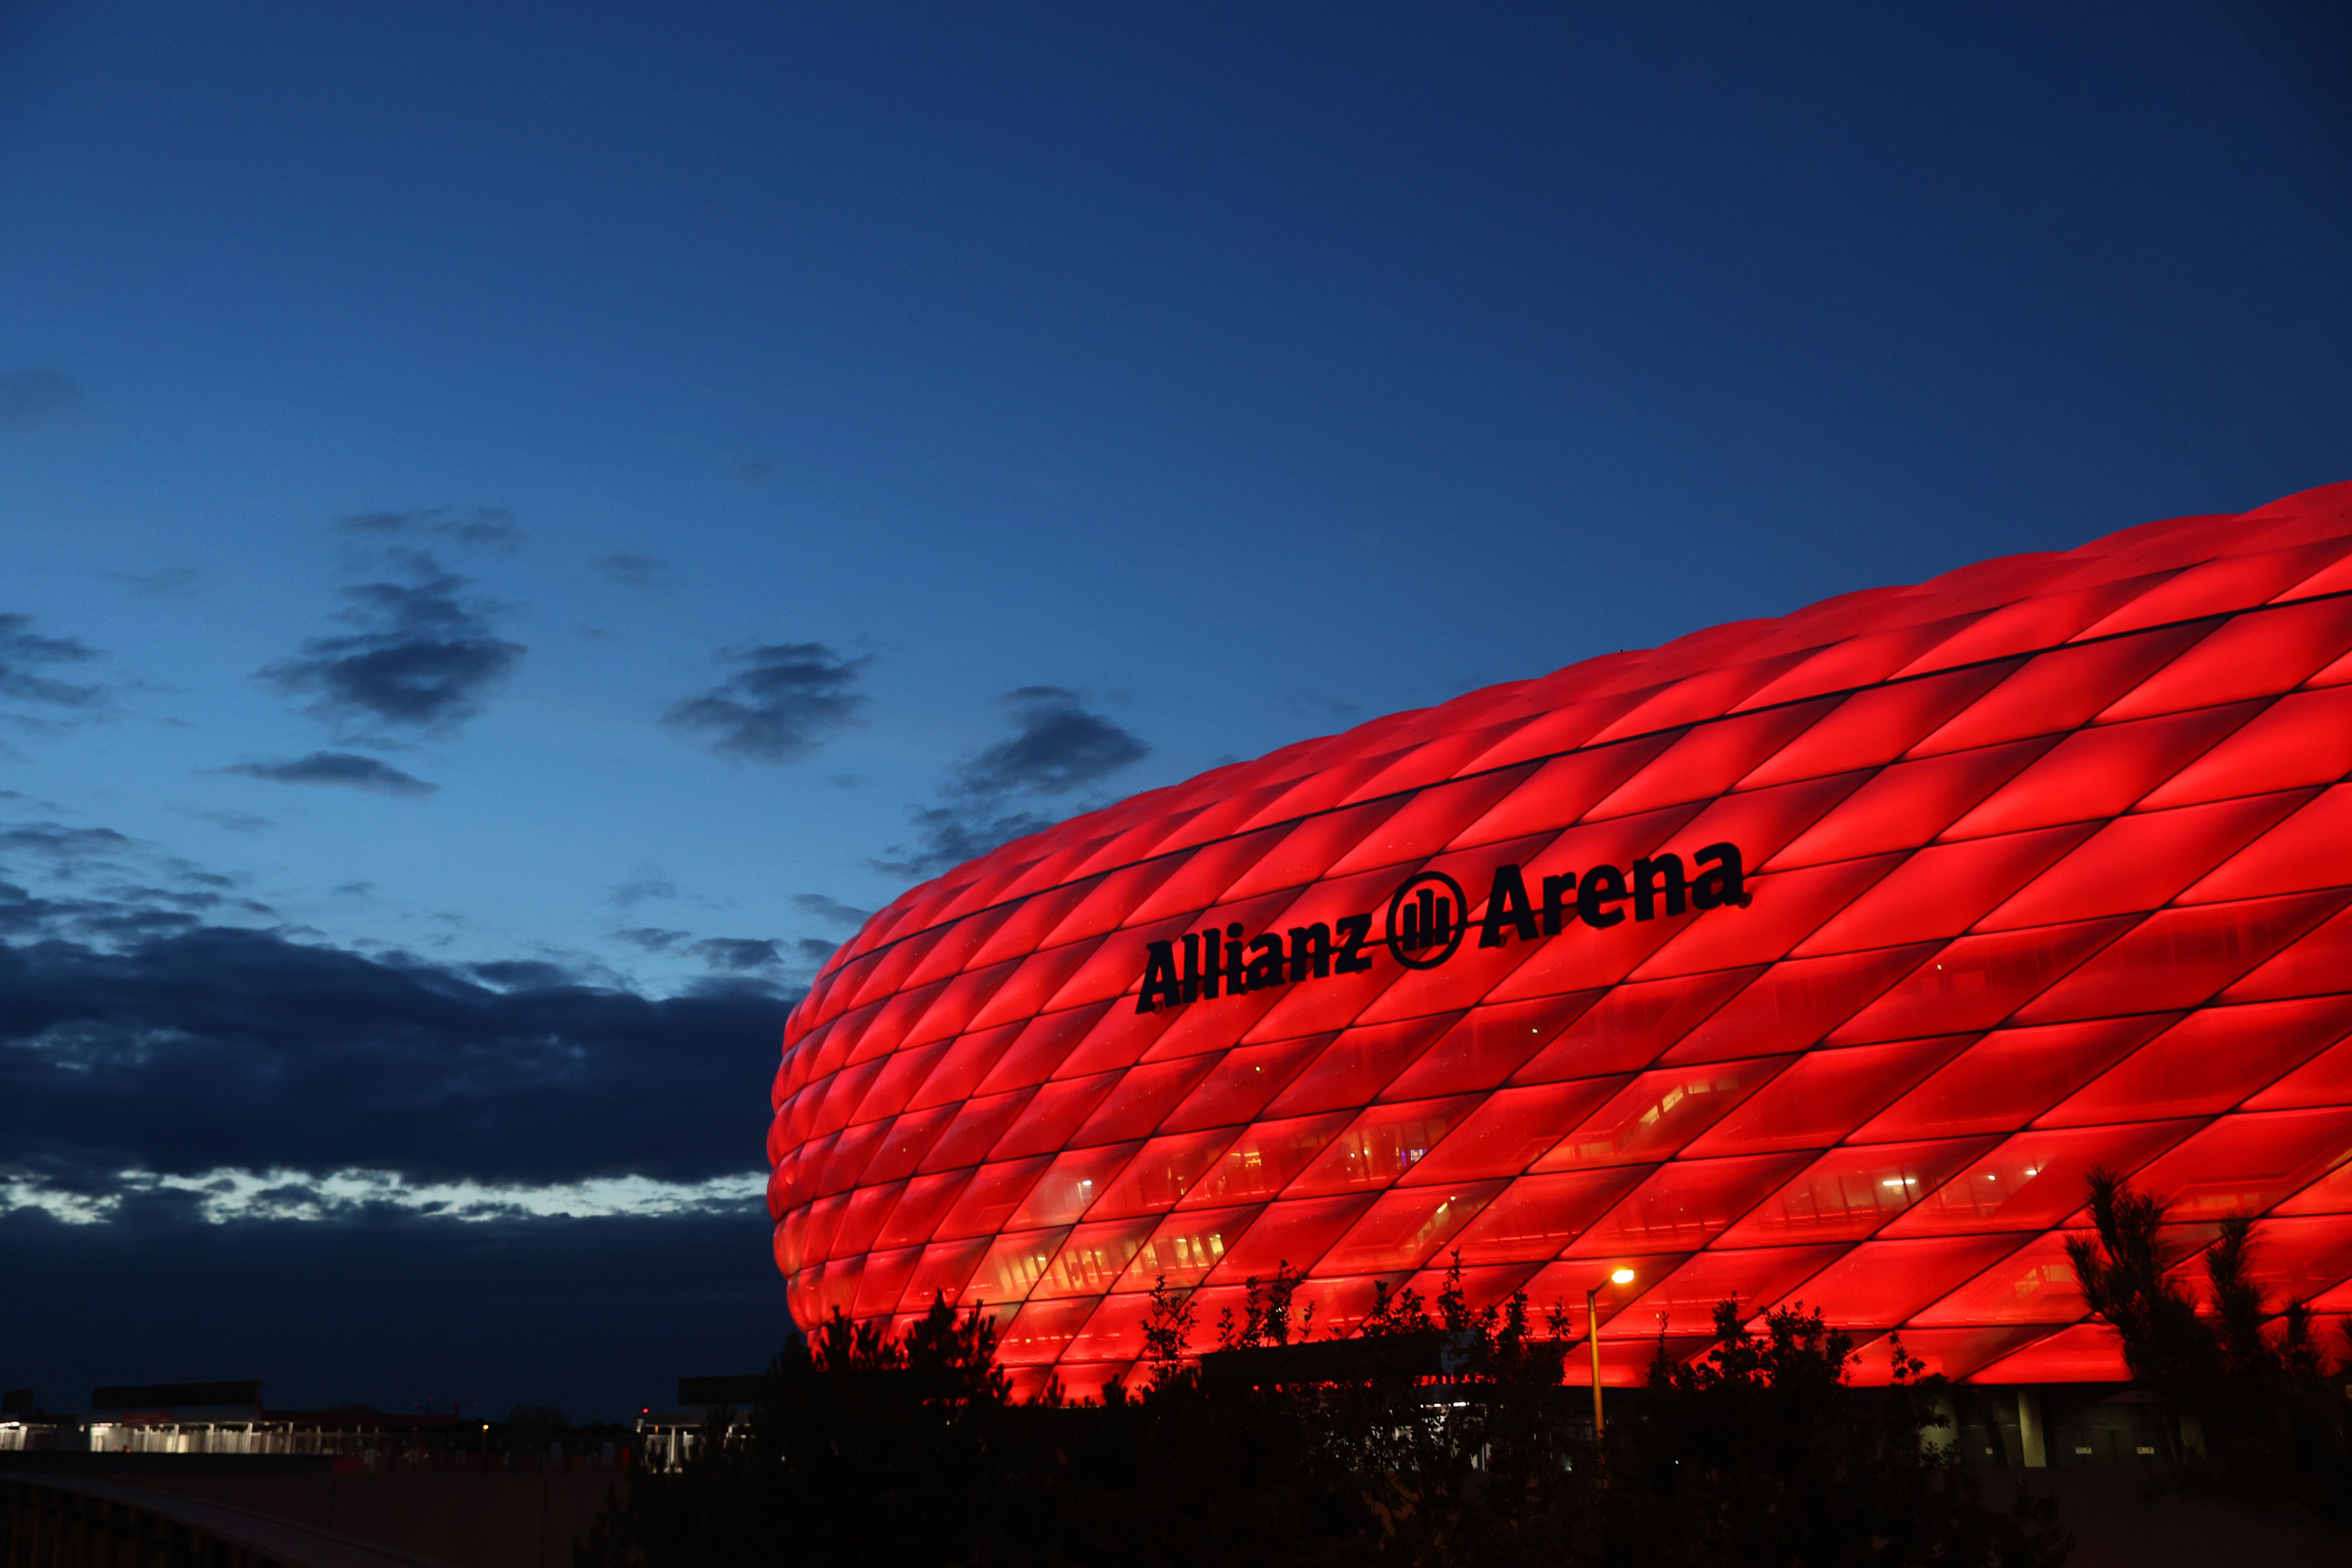 A general view of the outside of Bayern Munich's stadium - the Allianz Arena.